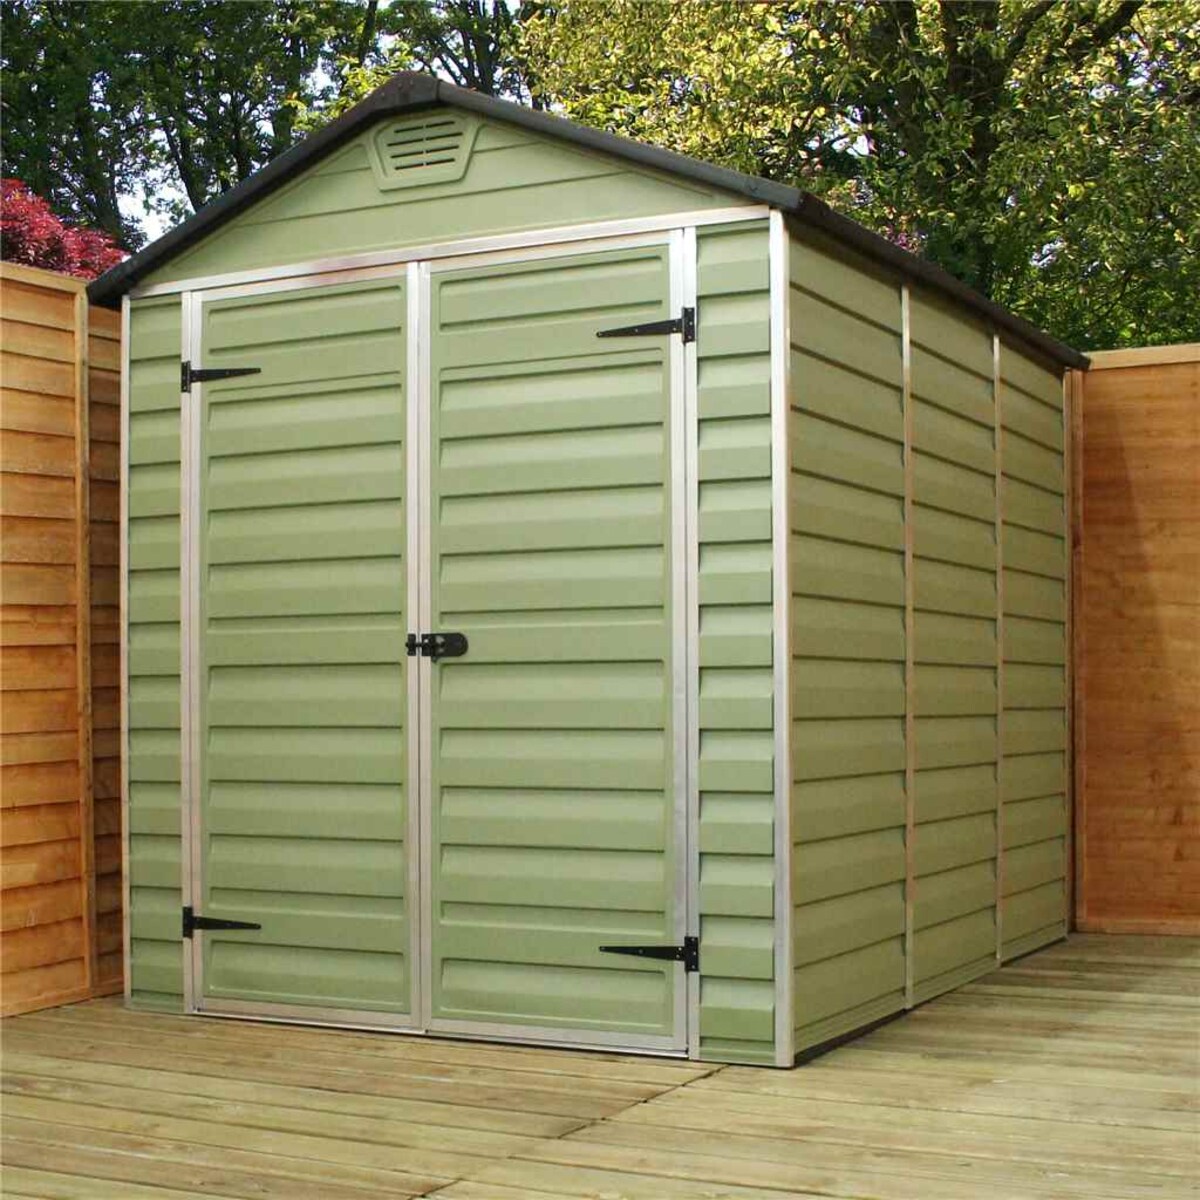 How To Put Together A Plastic Shed